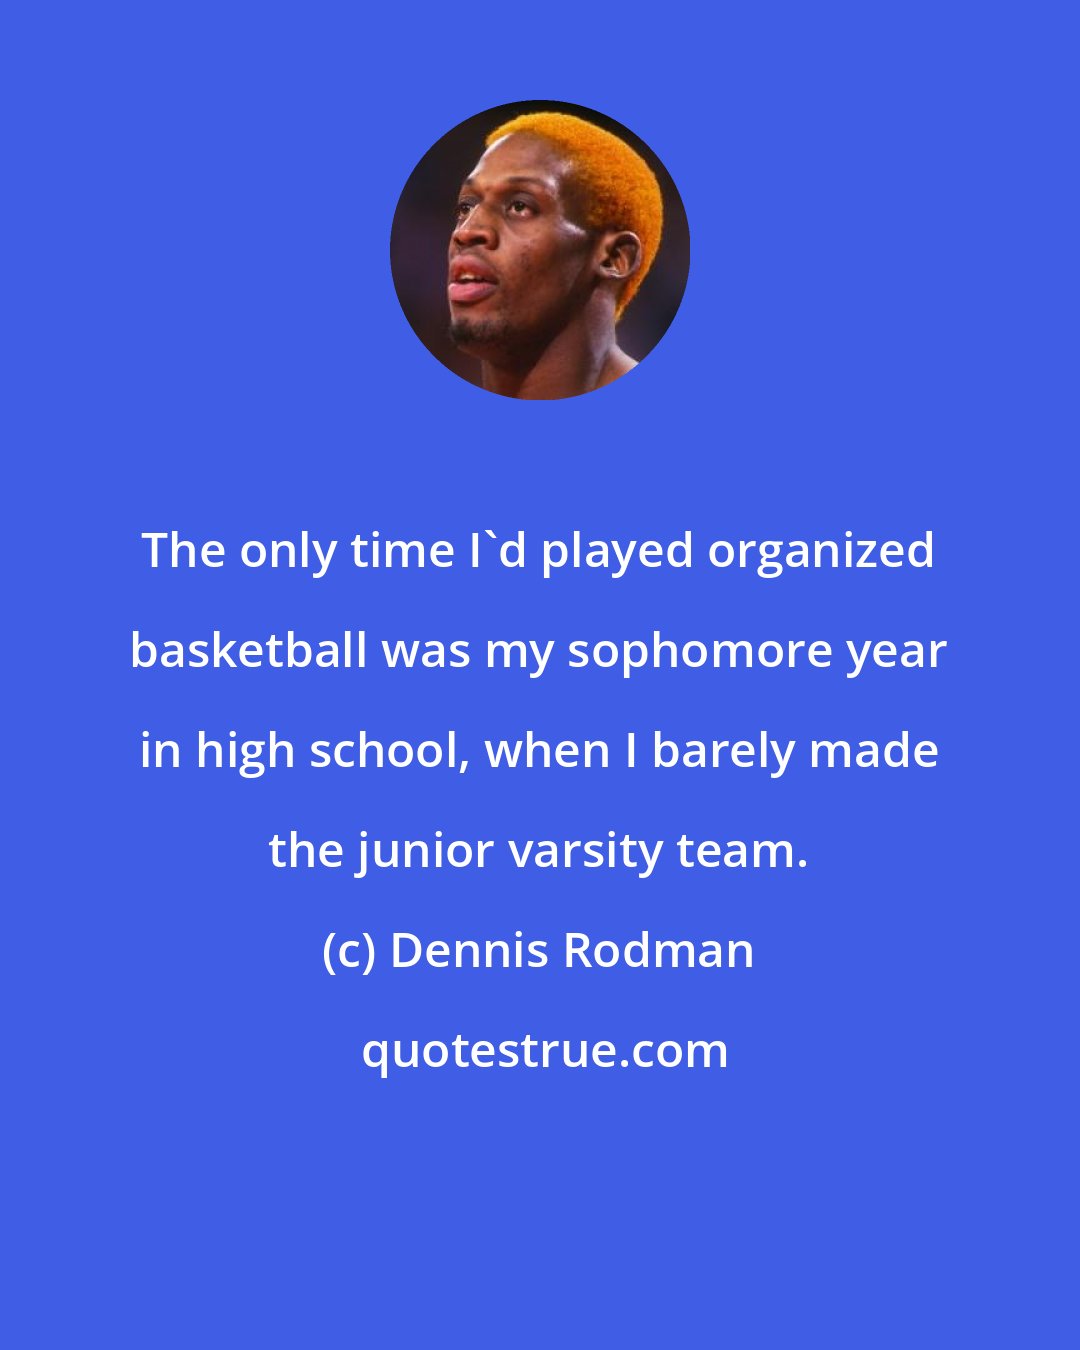 Dennis Rodman: The only time I'd played organized basketball was my sophomore year in high school, when I barely made the junior varsity team.